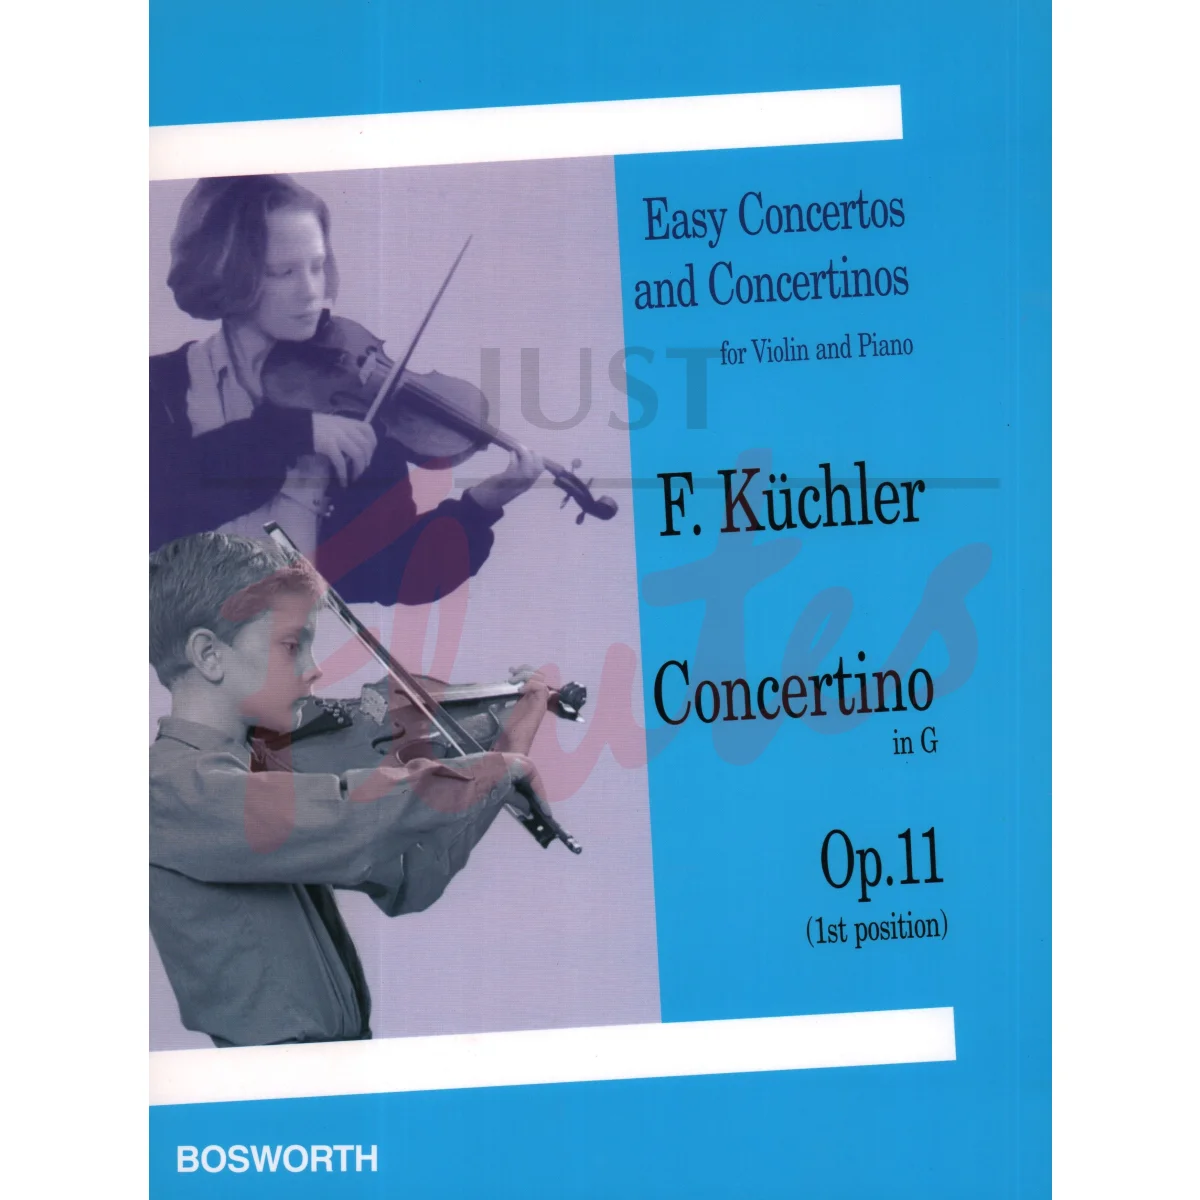 Concertino in G (First Position) for Violin and Piano